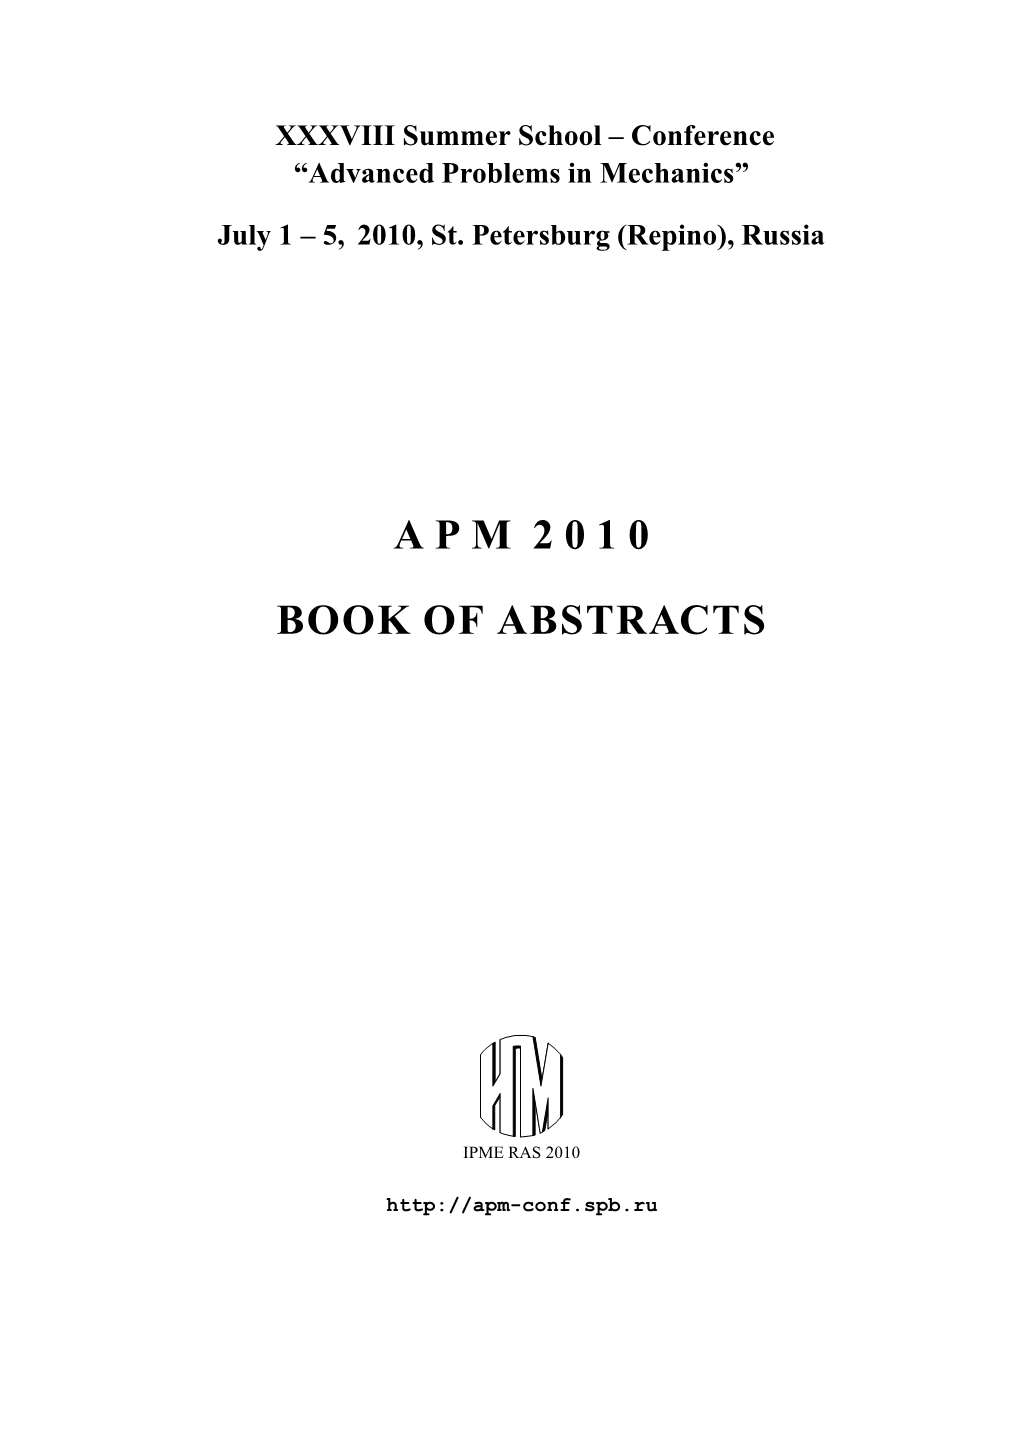 Apm 2010 Book of Abstracts